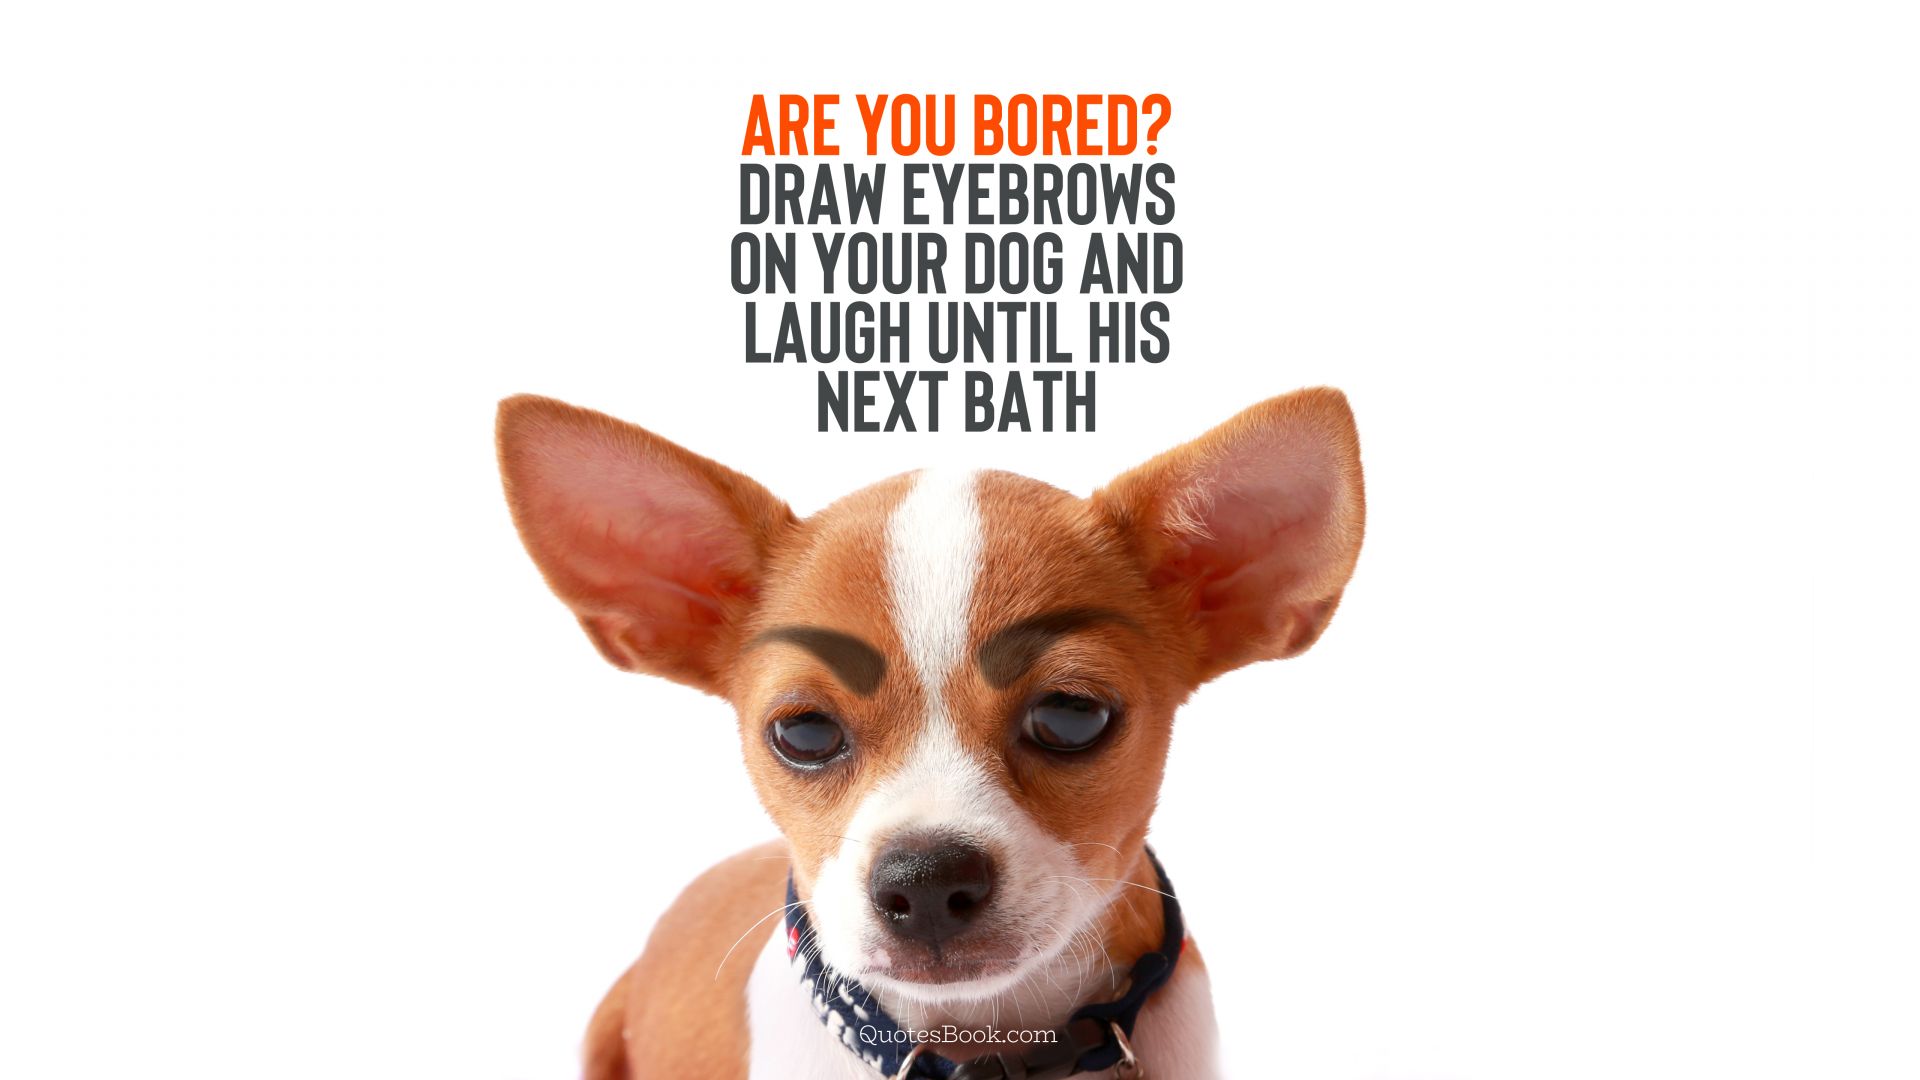 Are you bored? Draw eyebrows on your dog and laugh until his next bath